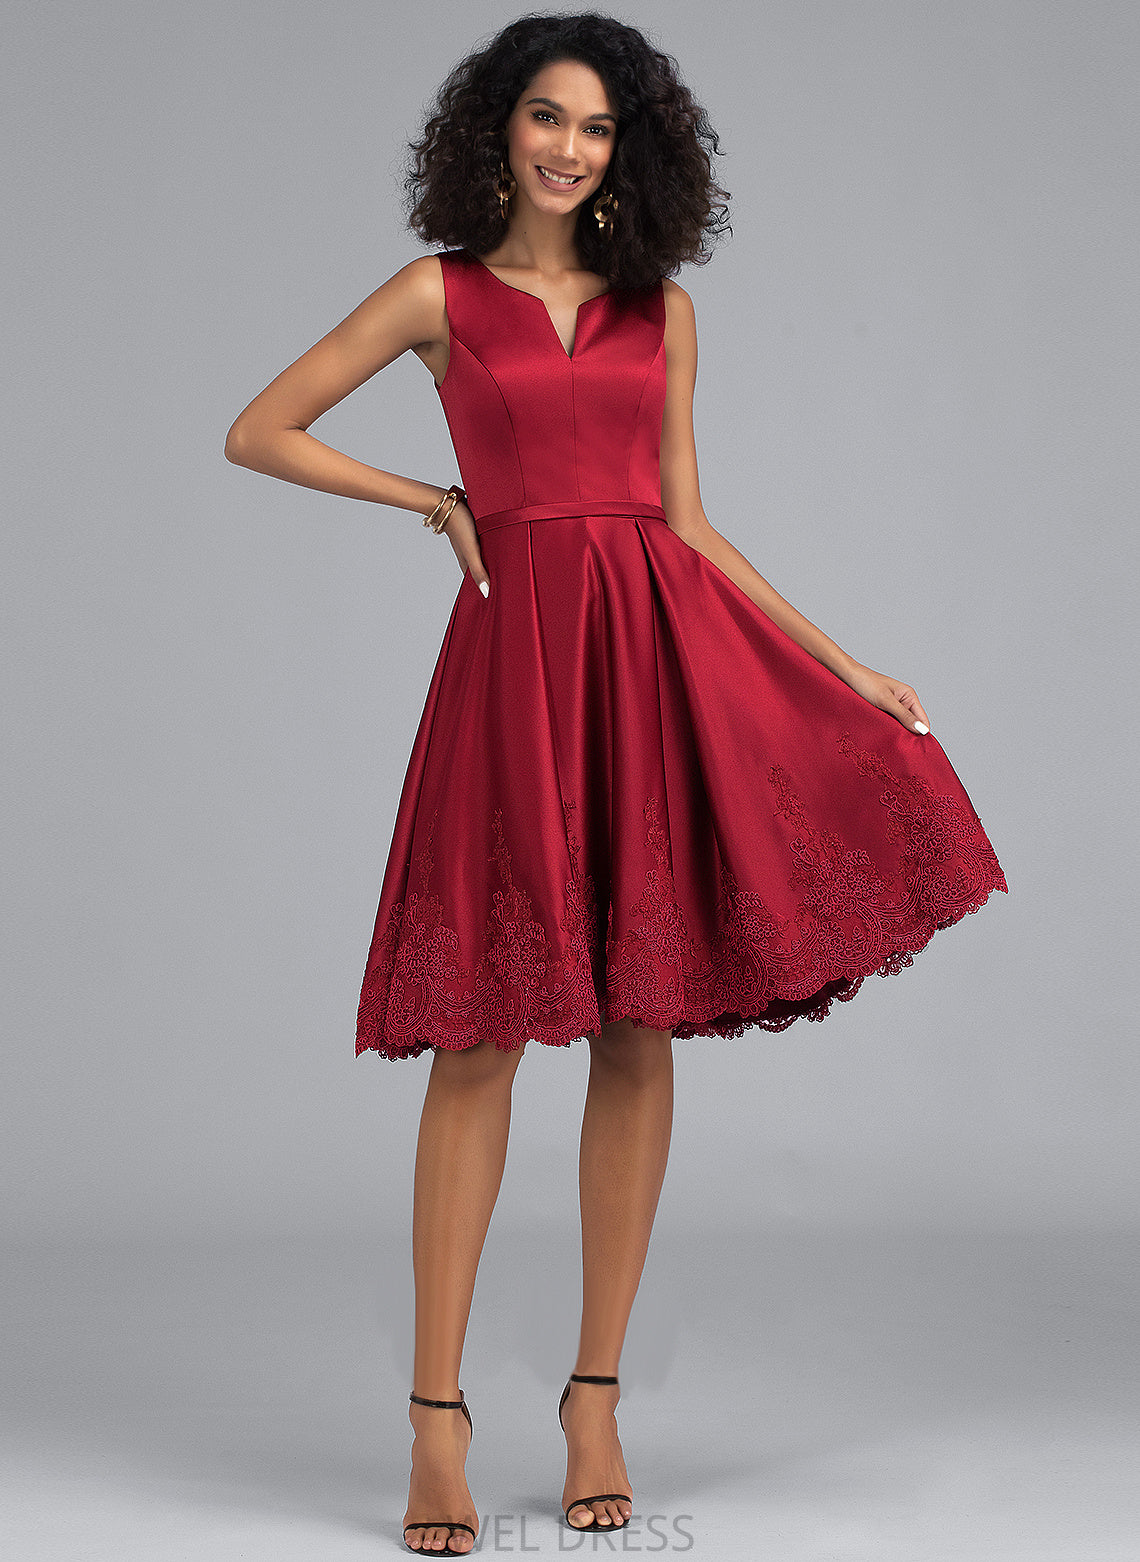 Knee-Length Homecoming Dresses A-Line Dress Satin Lace With V-neck Riley Appliques Homecoming